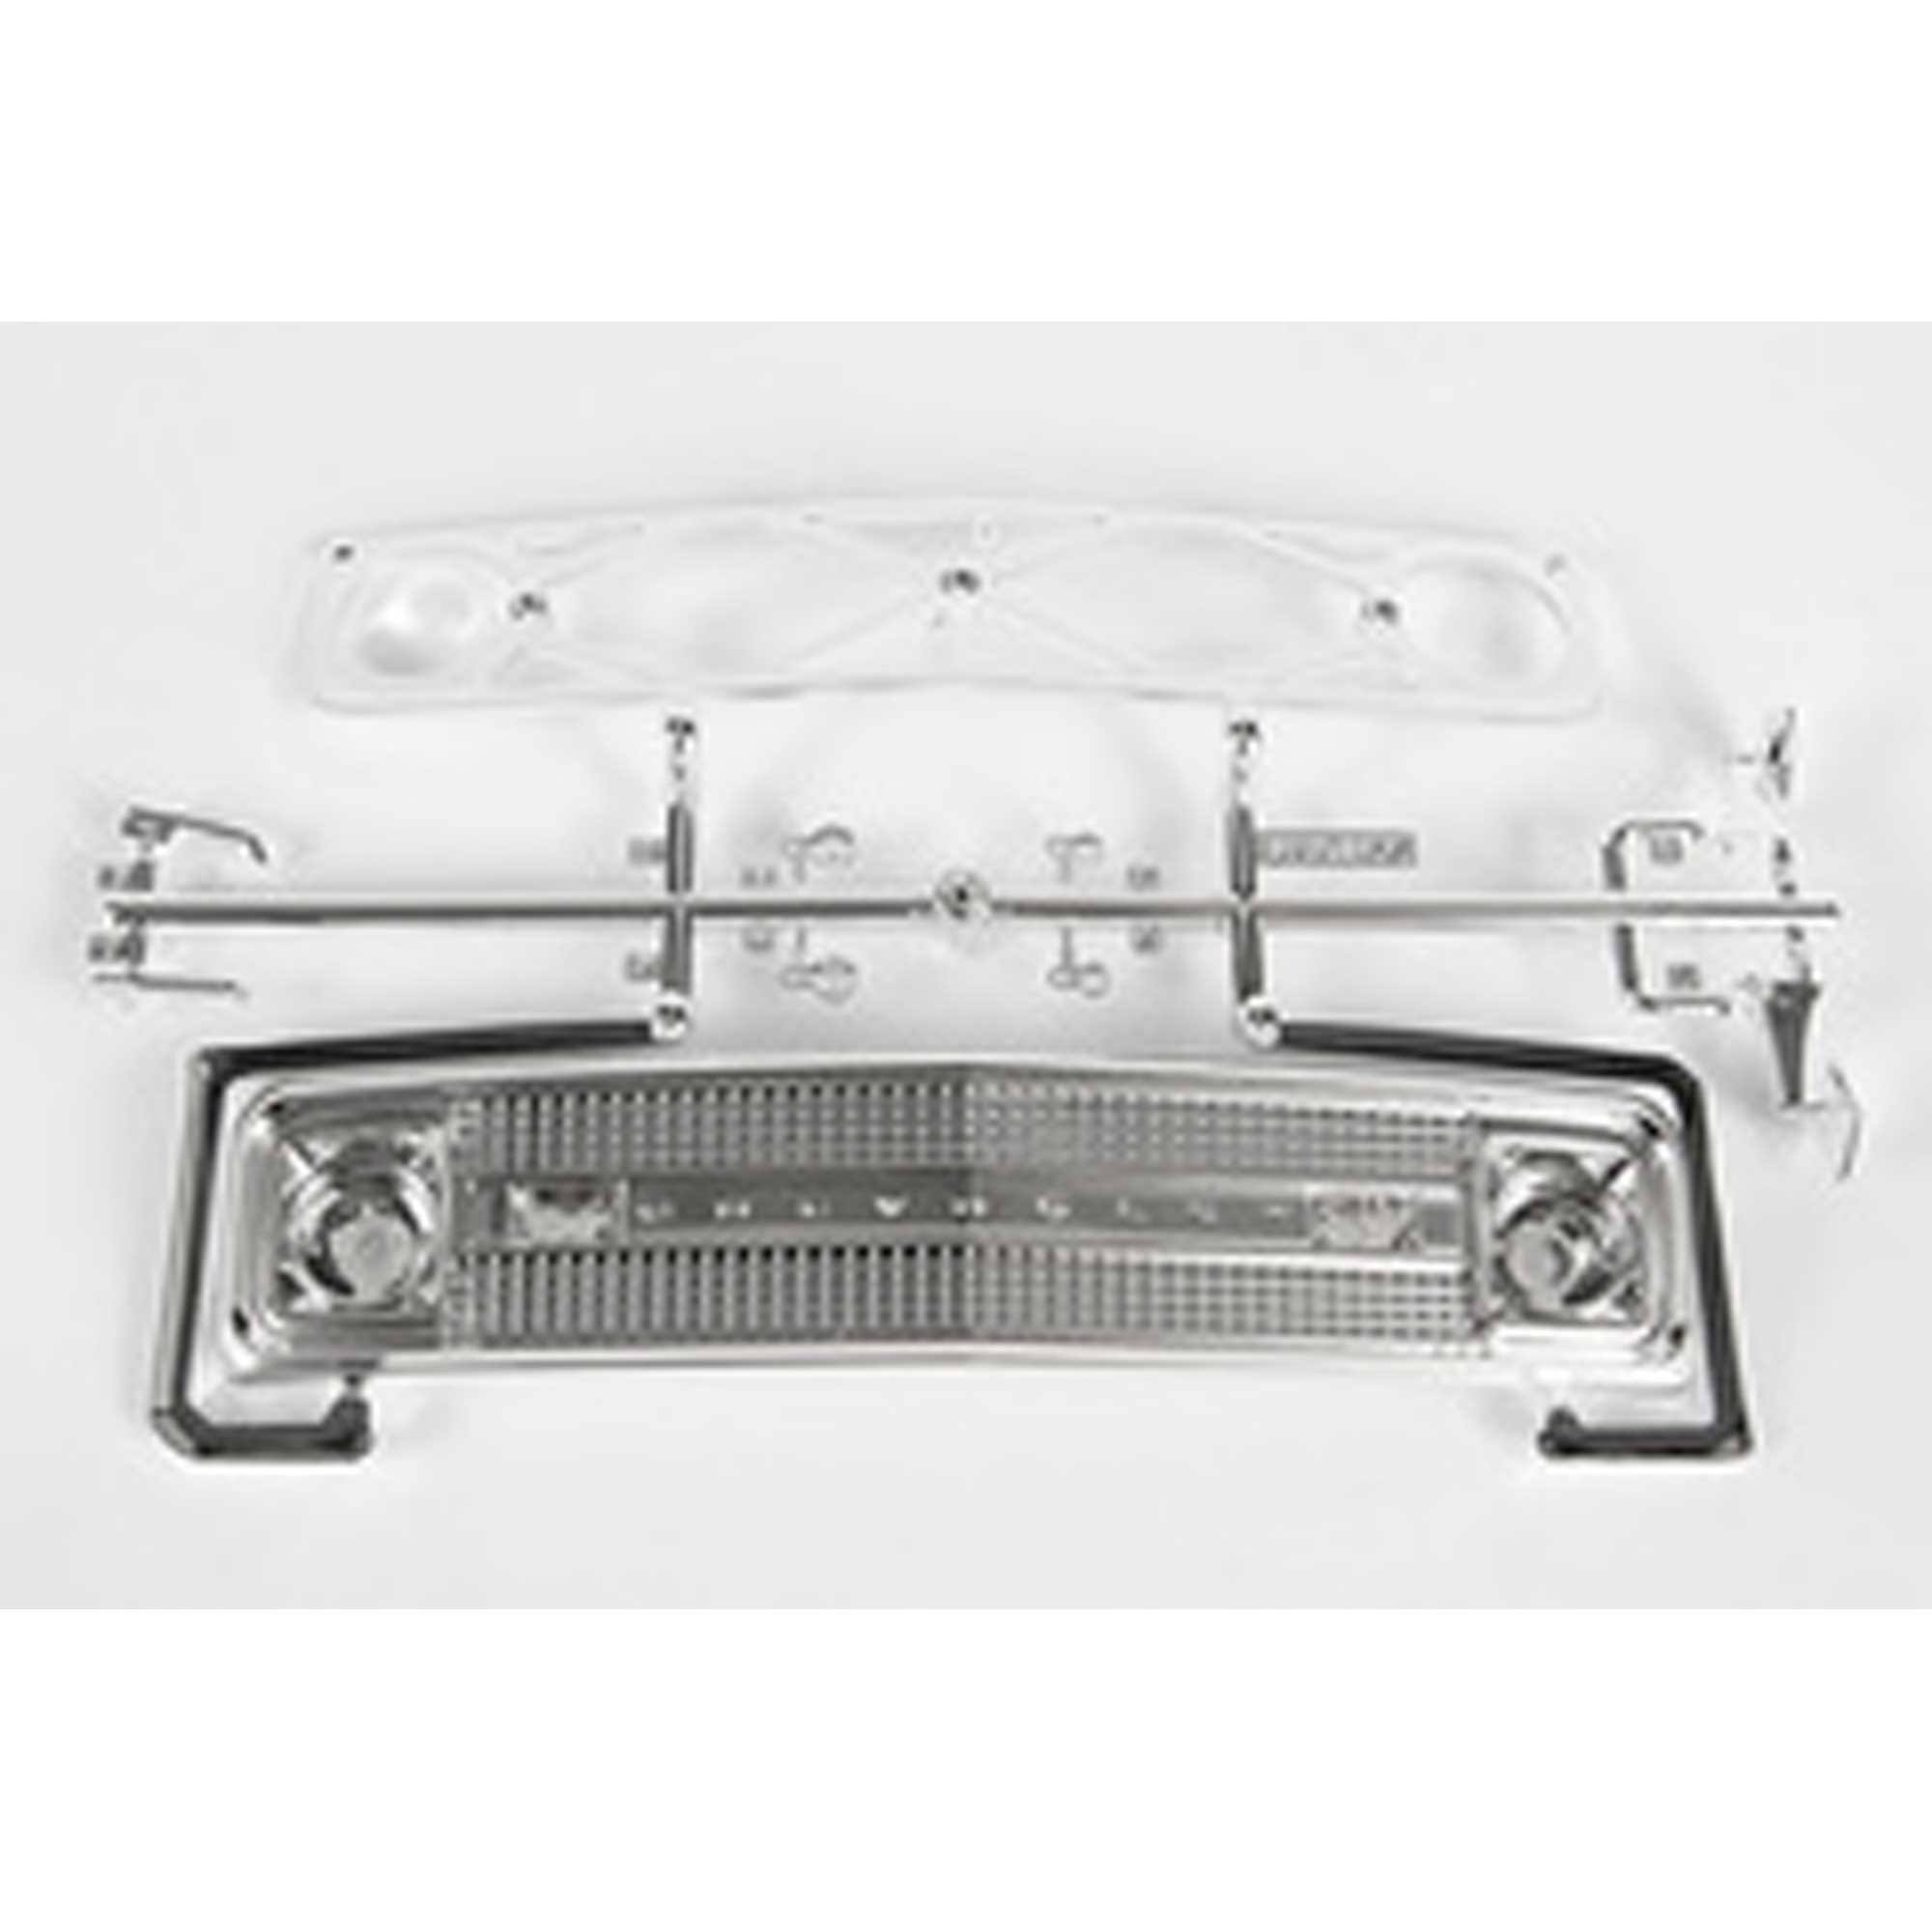 Axial AX31549 1969 Chevrolet K5 Blazer Grille and Body Details SCX10 II